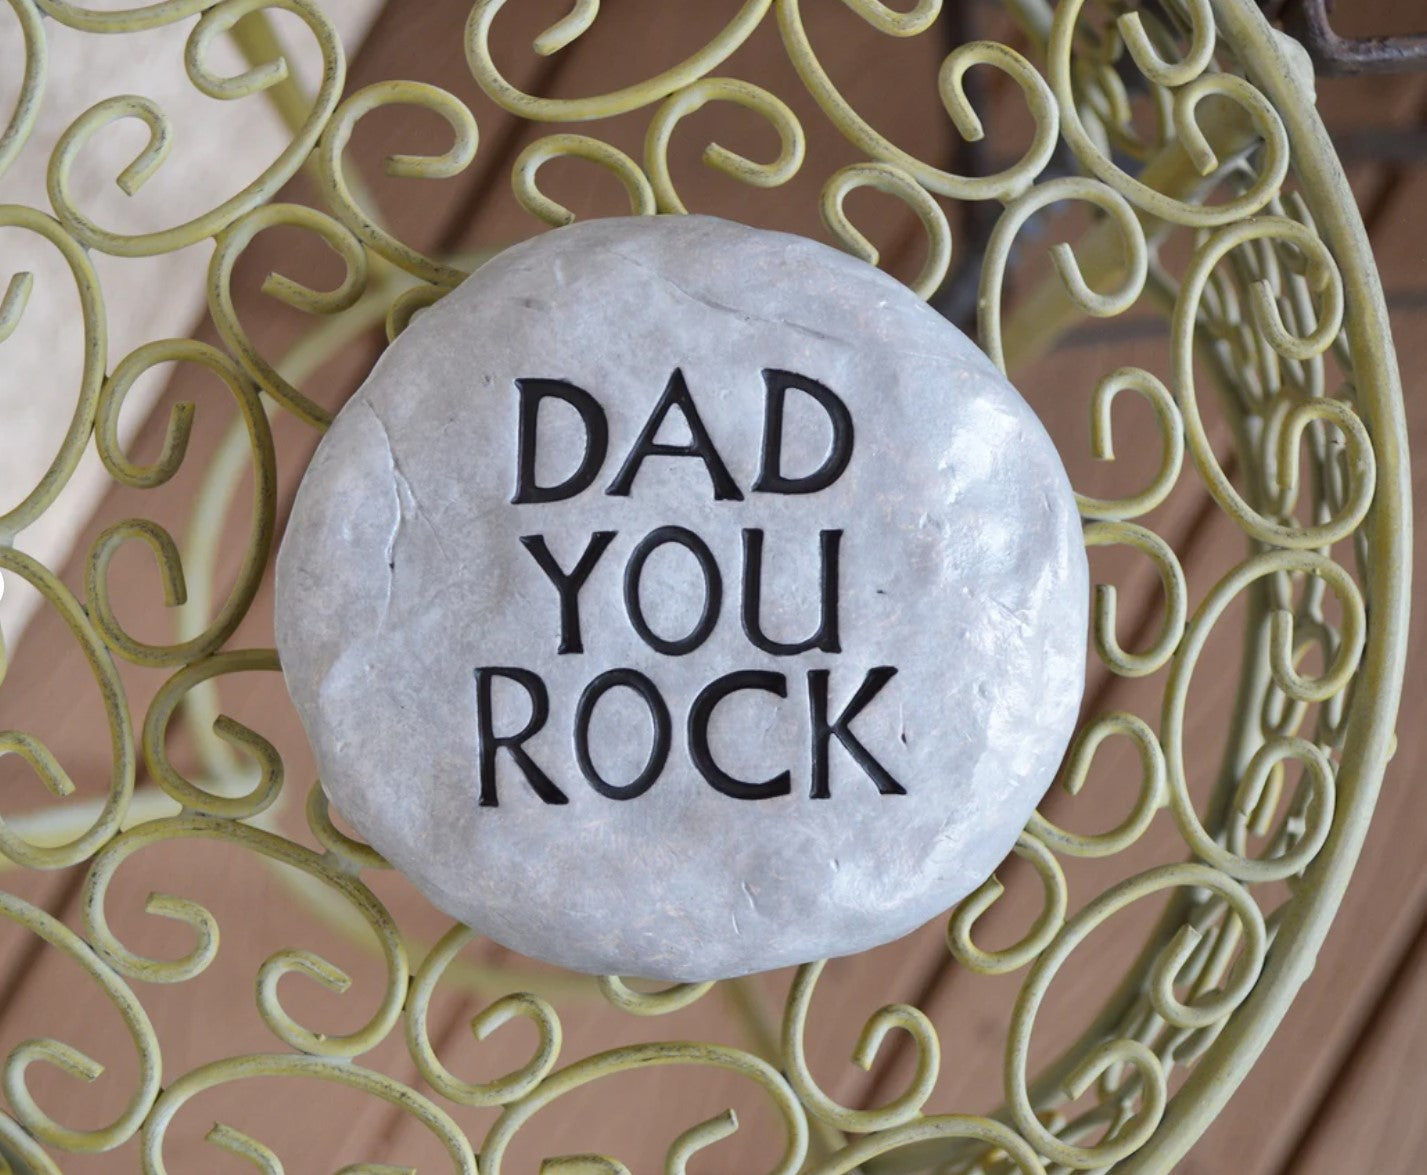 Gift for dad / funny dad gifts / Birthday gift for dad / dad you rock stone / paperweight desk decor / goofy dad humor / READY TO SHIP